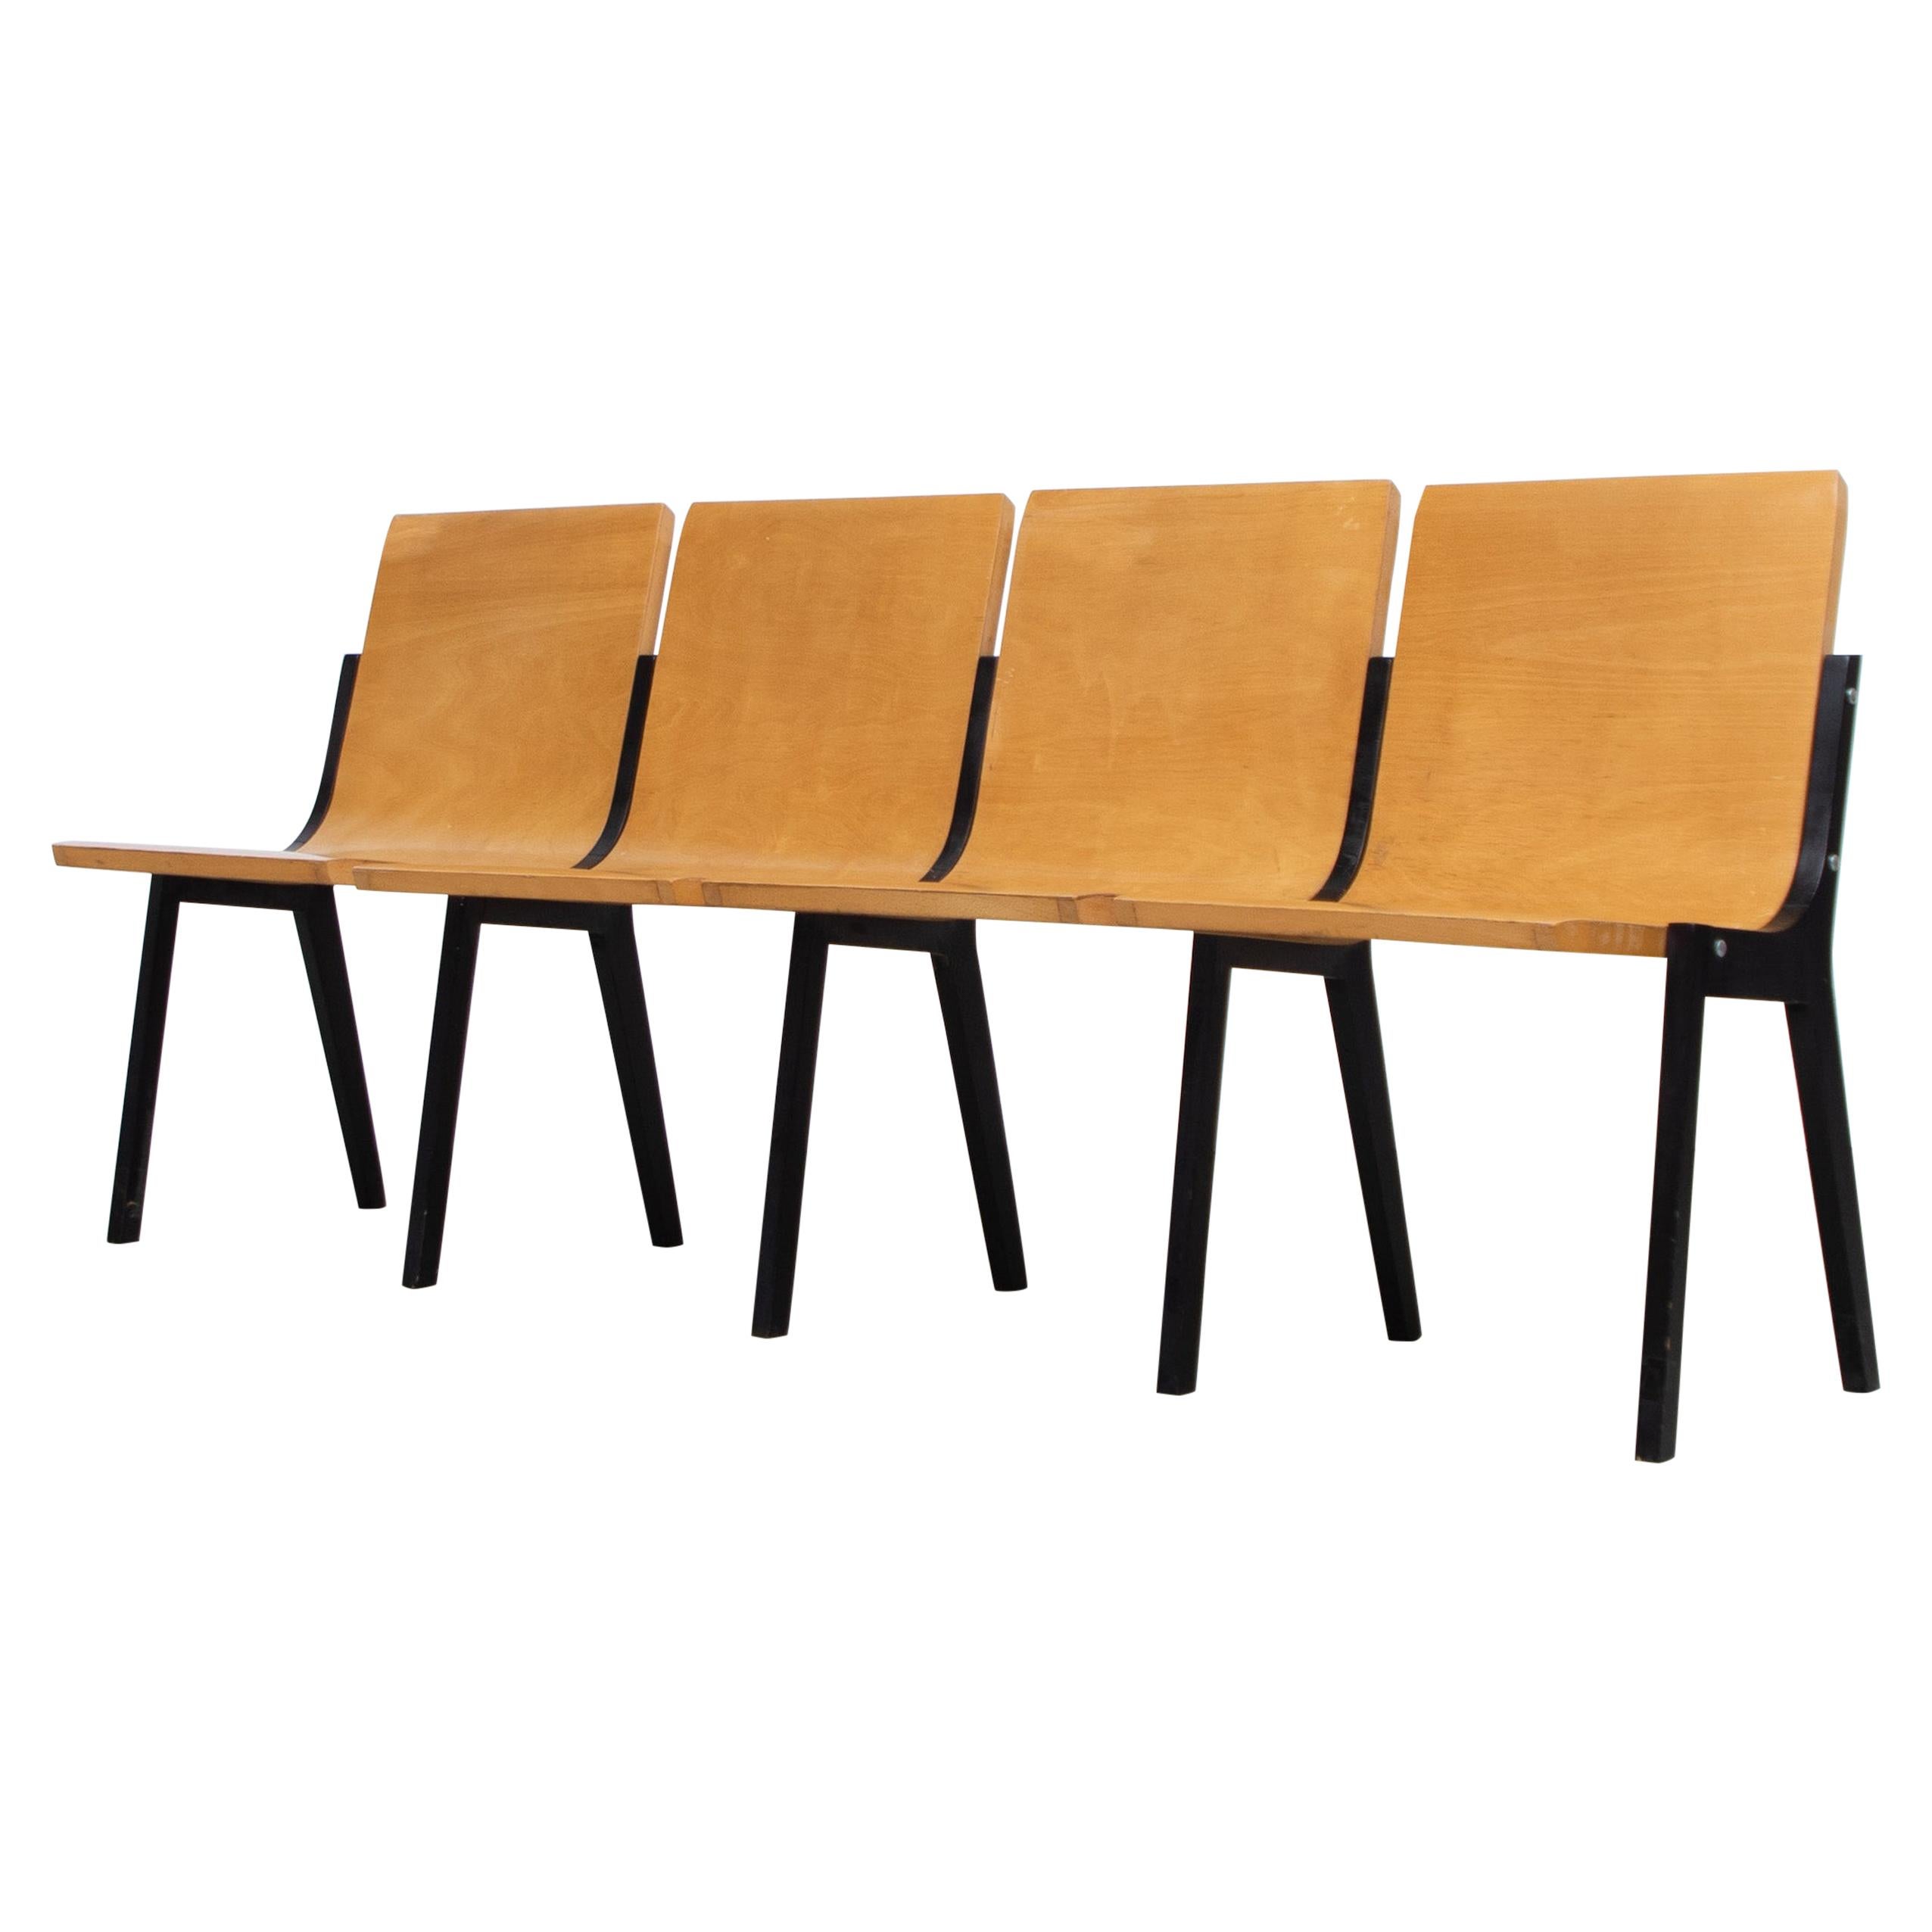 Roland Rainer 4 Seater Bench from a Dutch Church